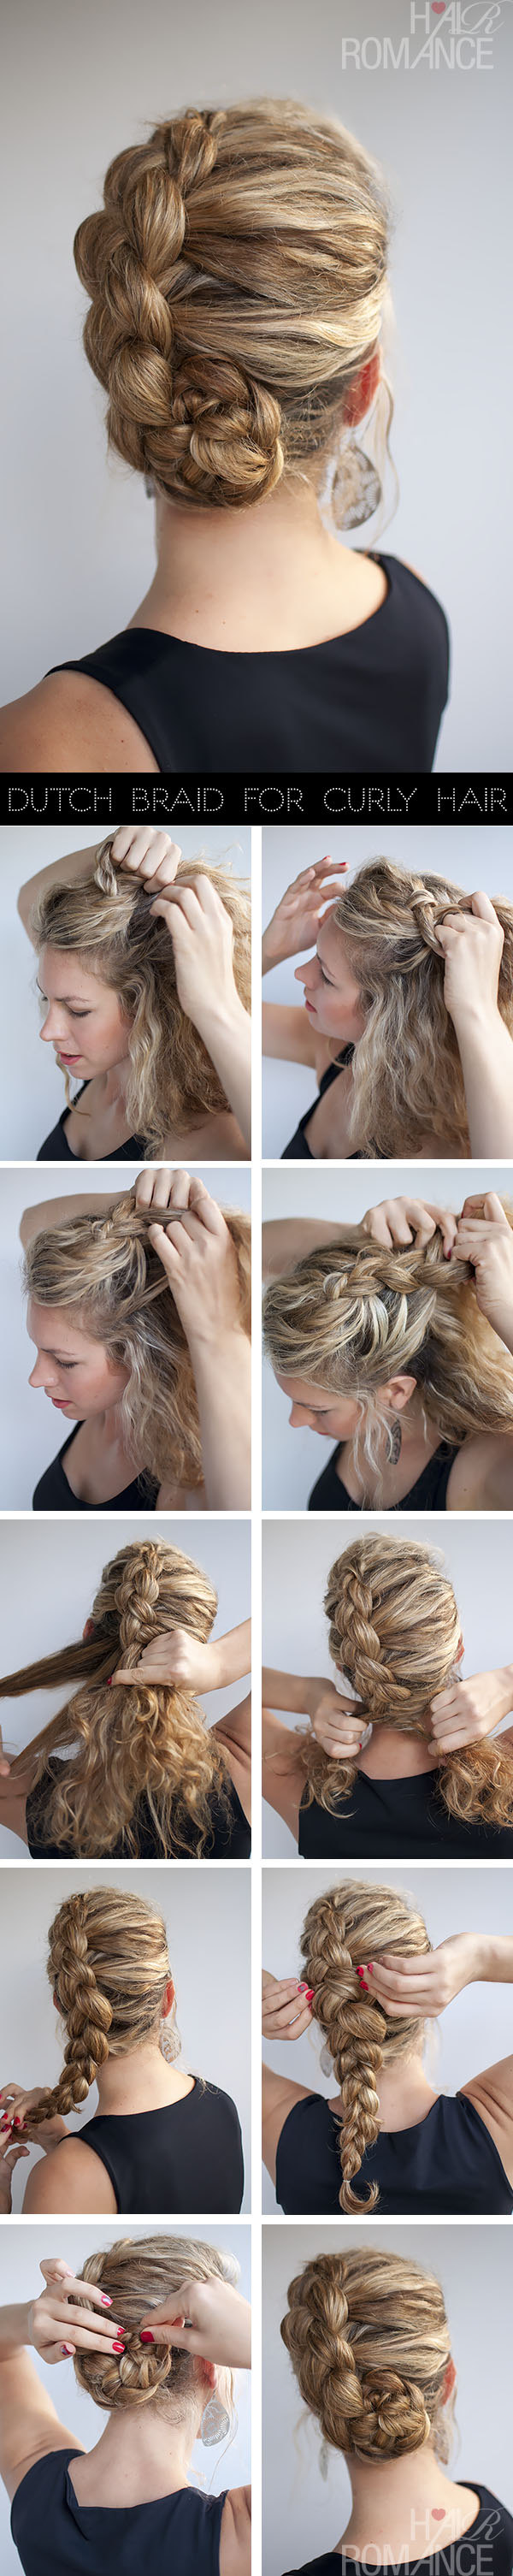 Hairstyles For Long Hair Step By Step Instructions